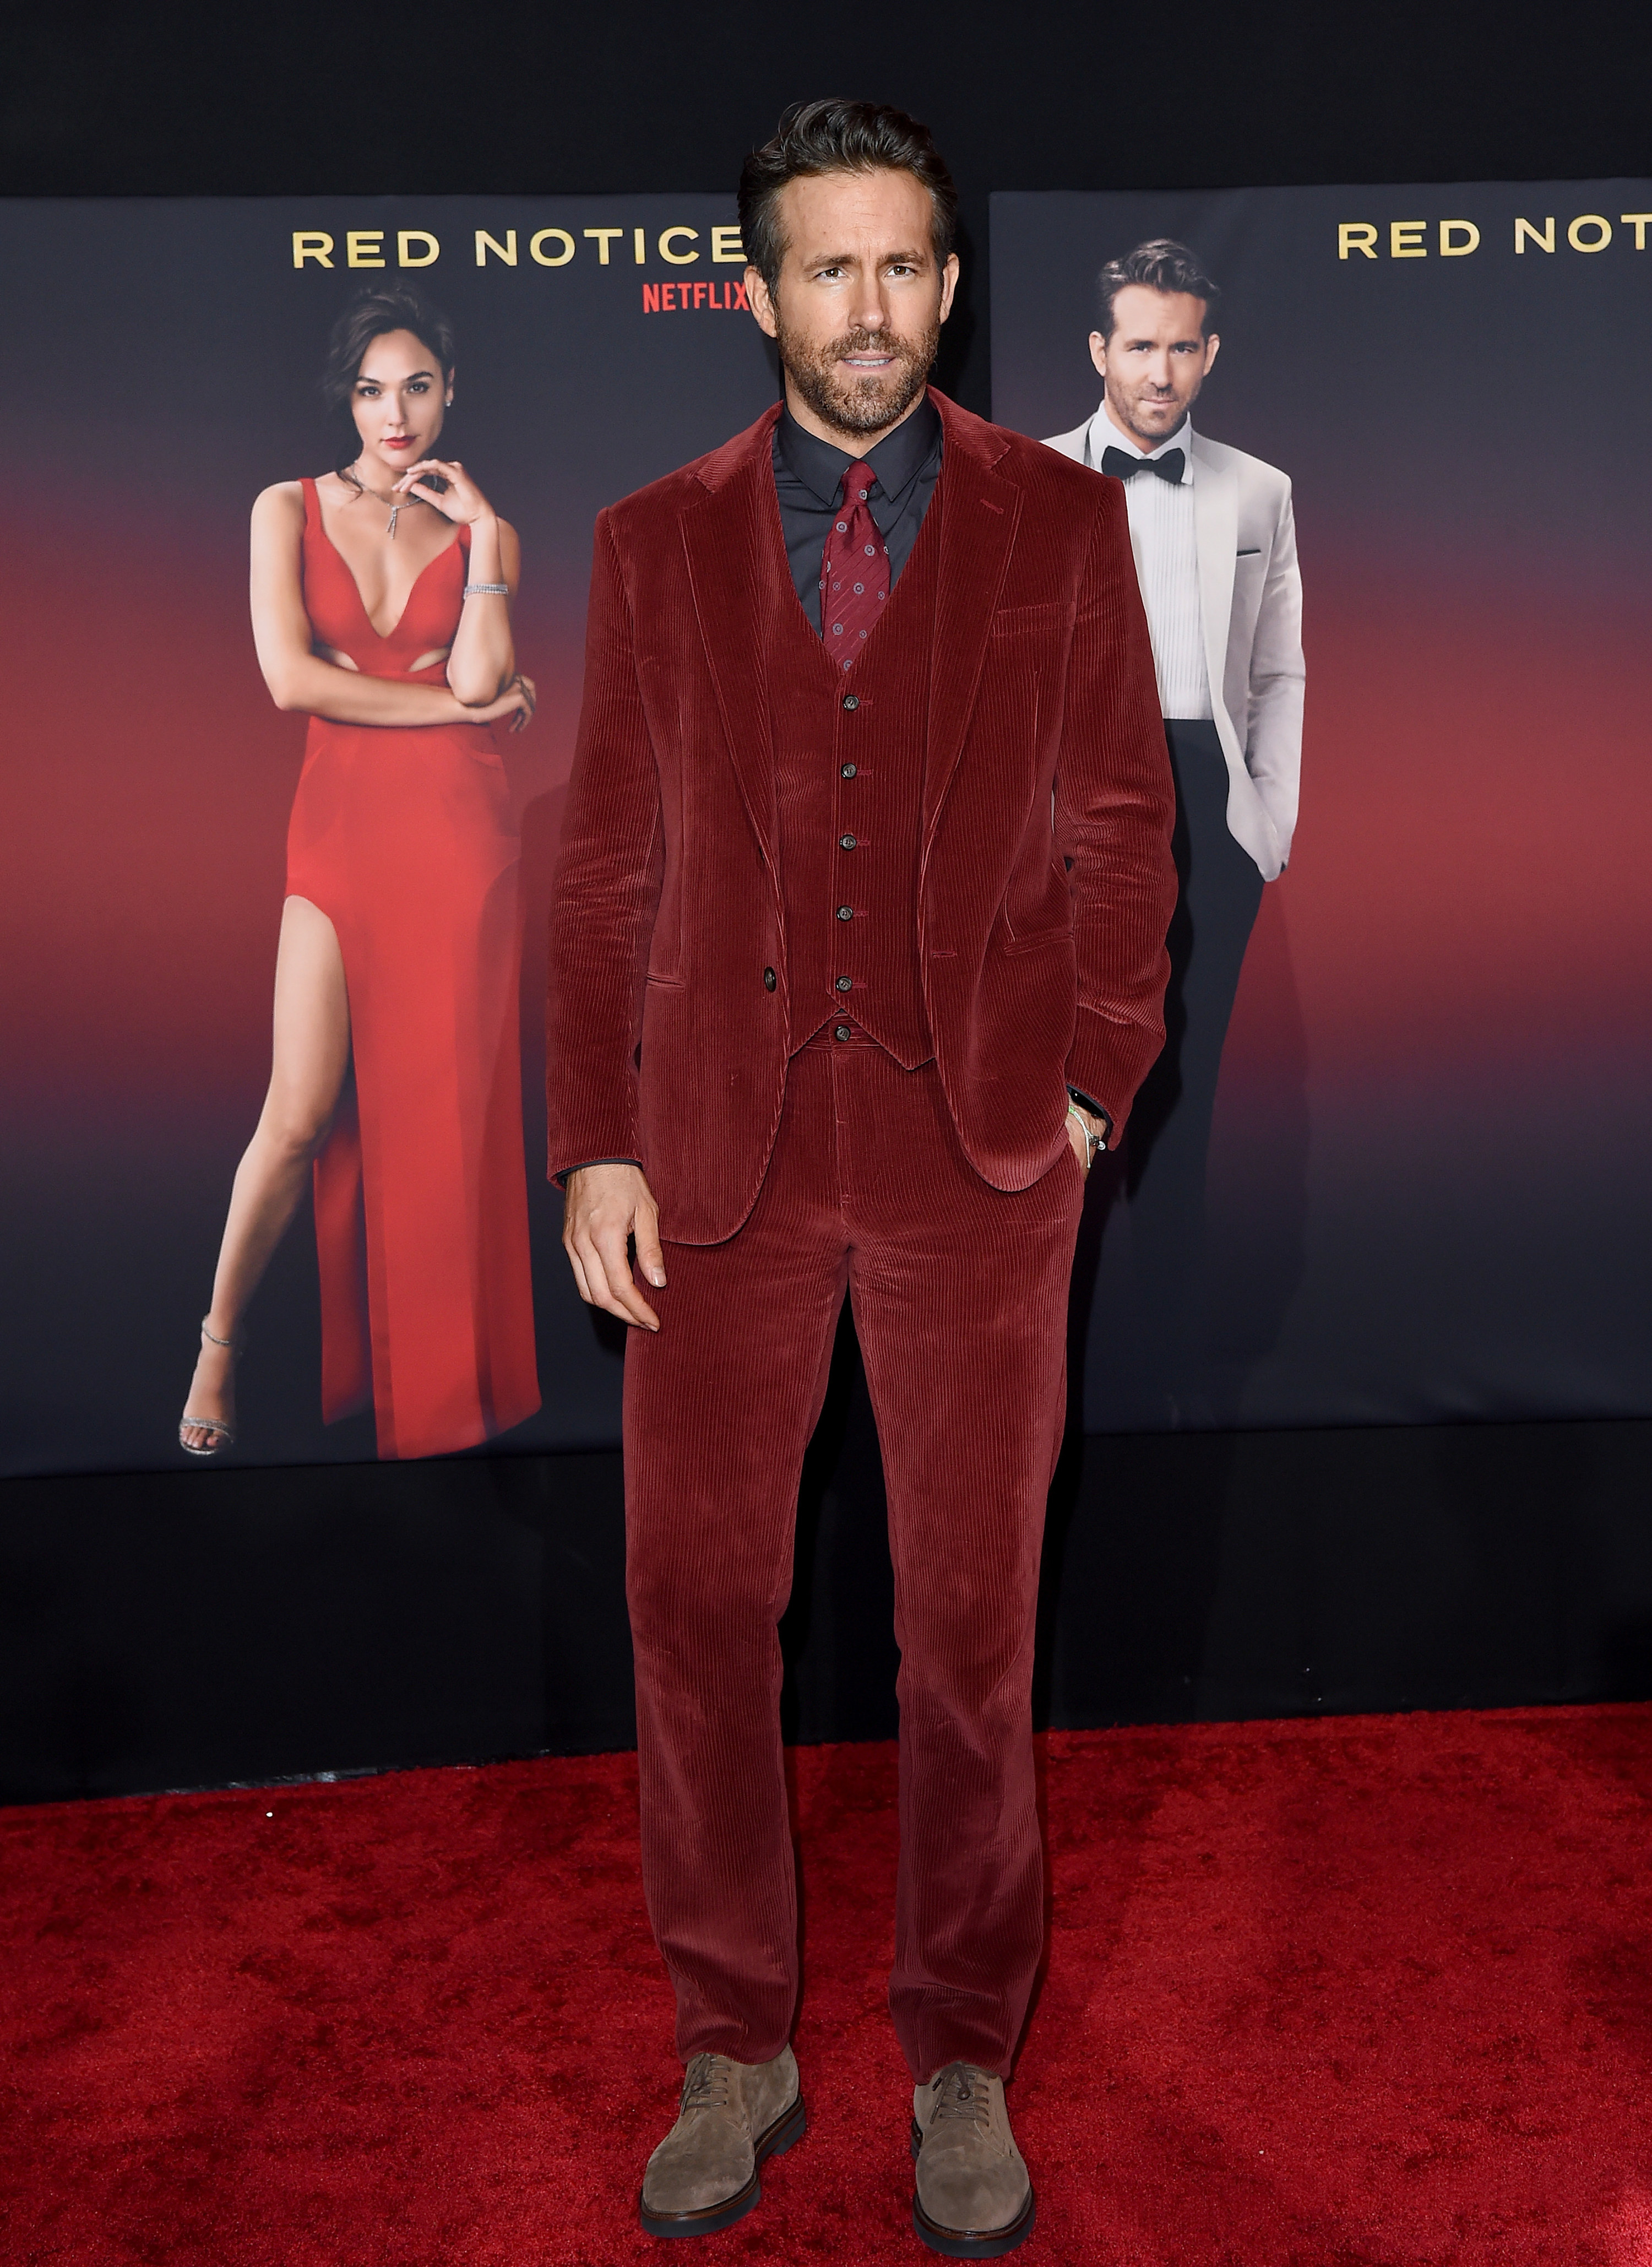 Ryan at the Red Notice premiere in a red suit